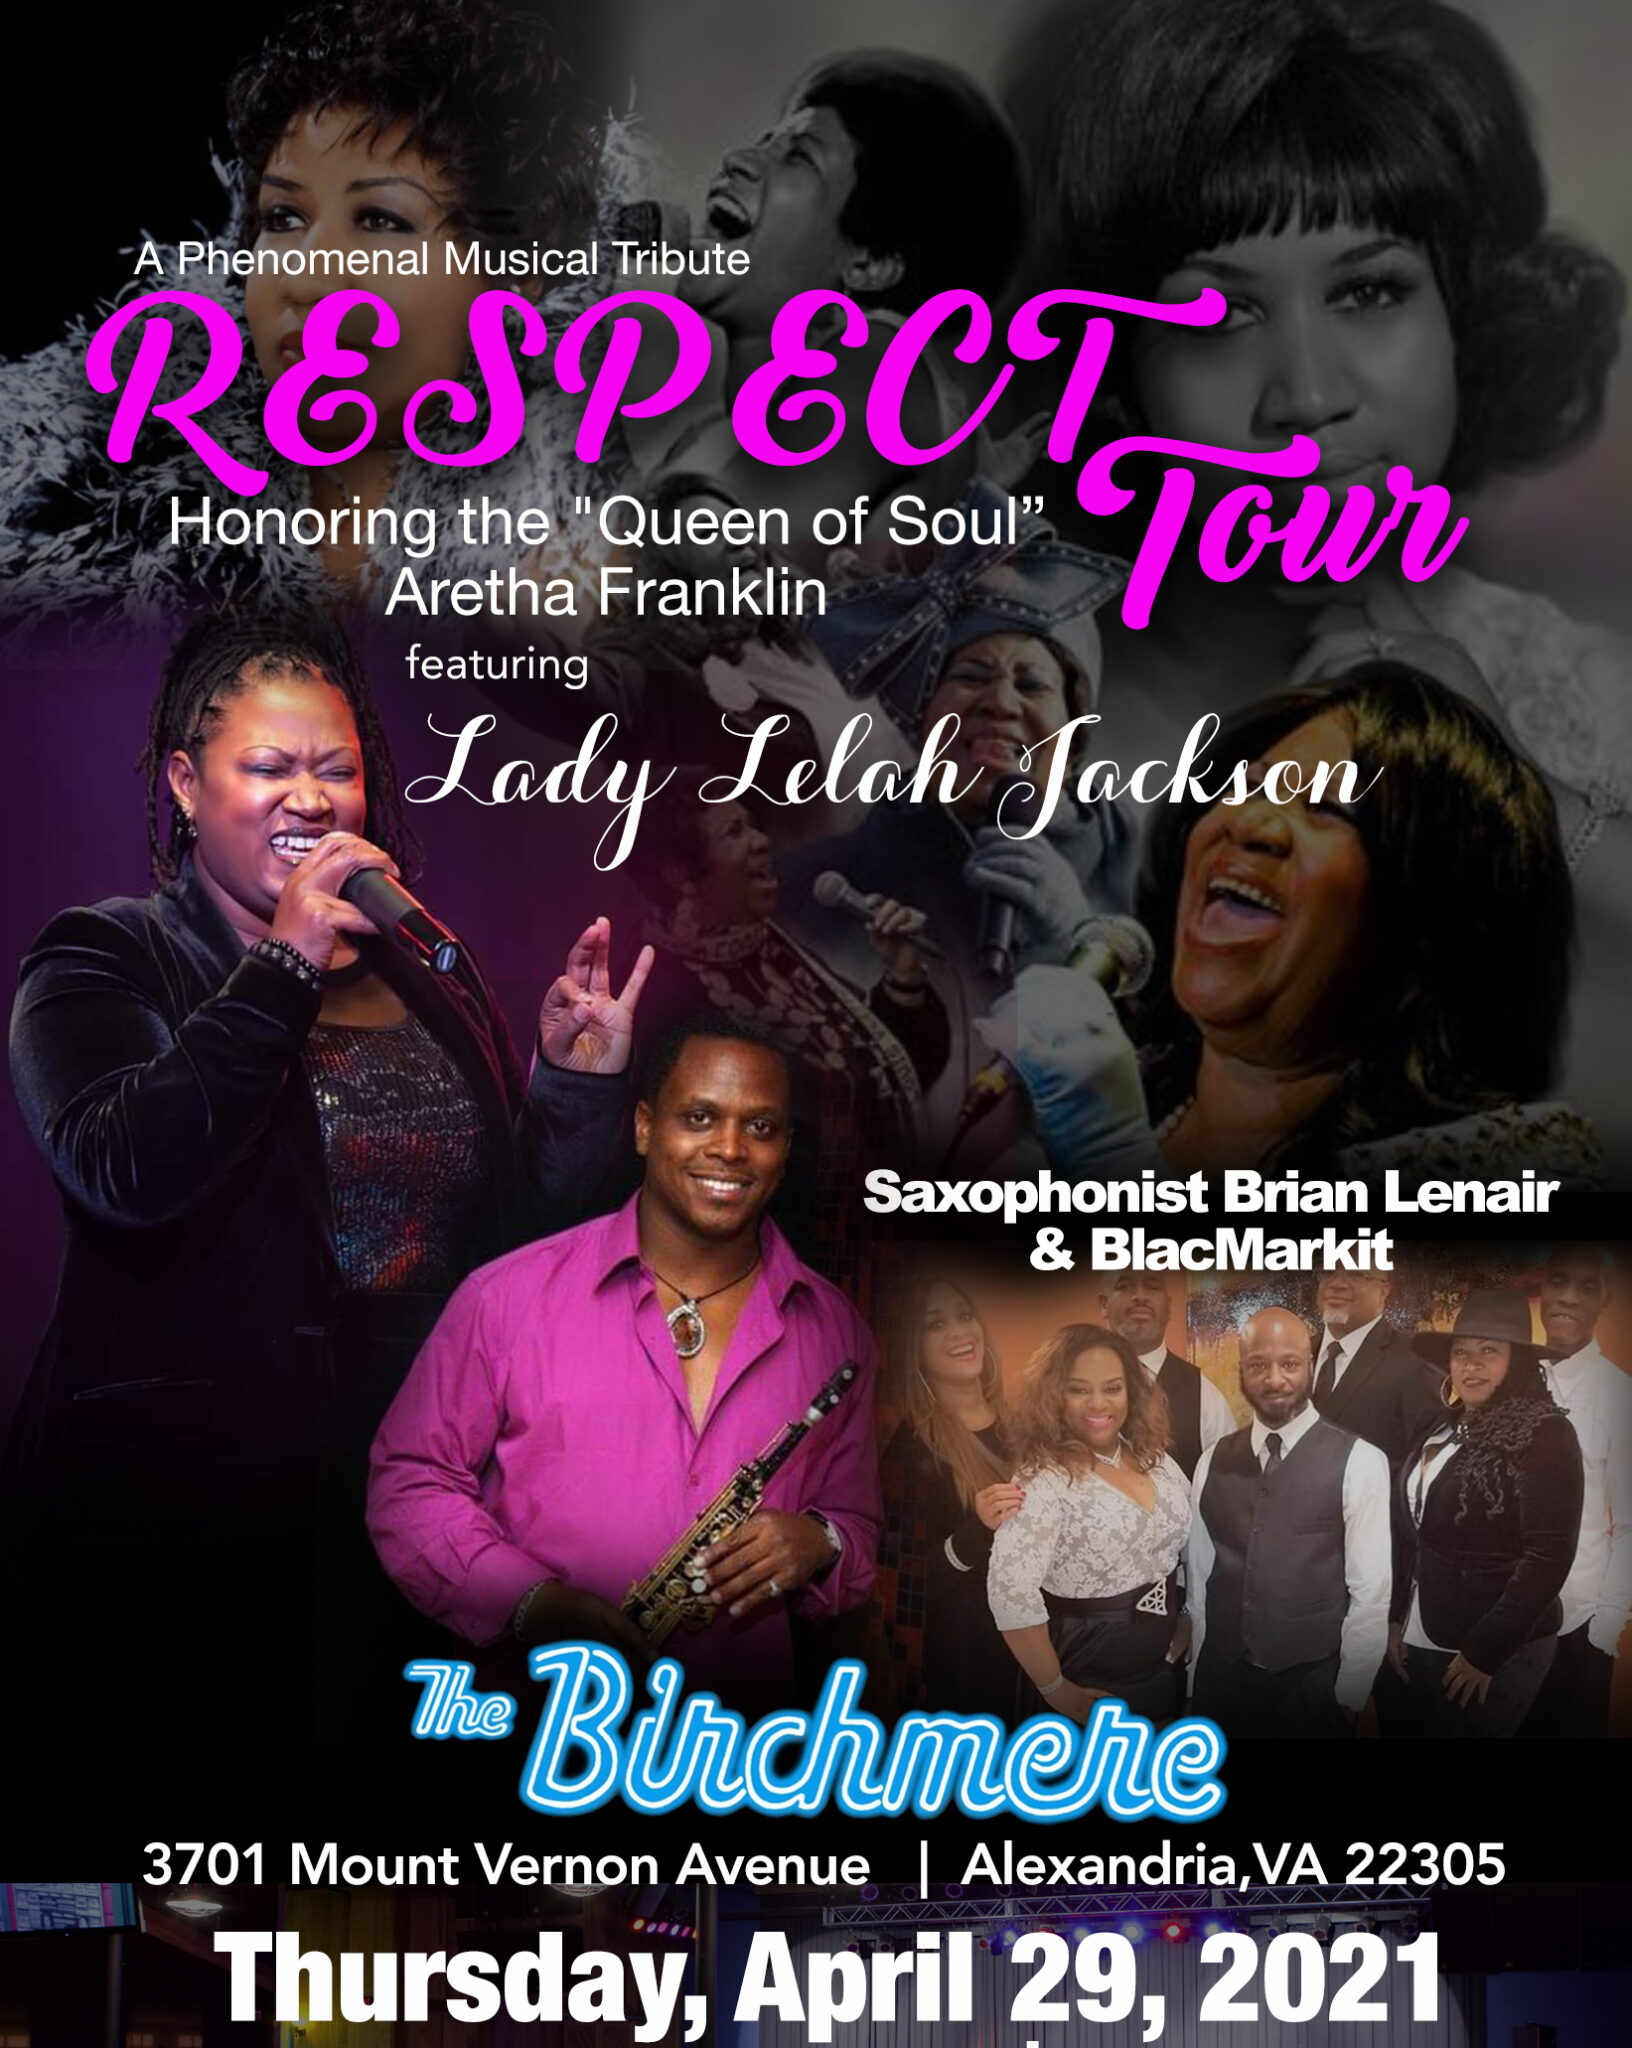 Events The Birchmere